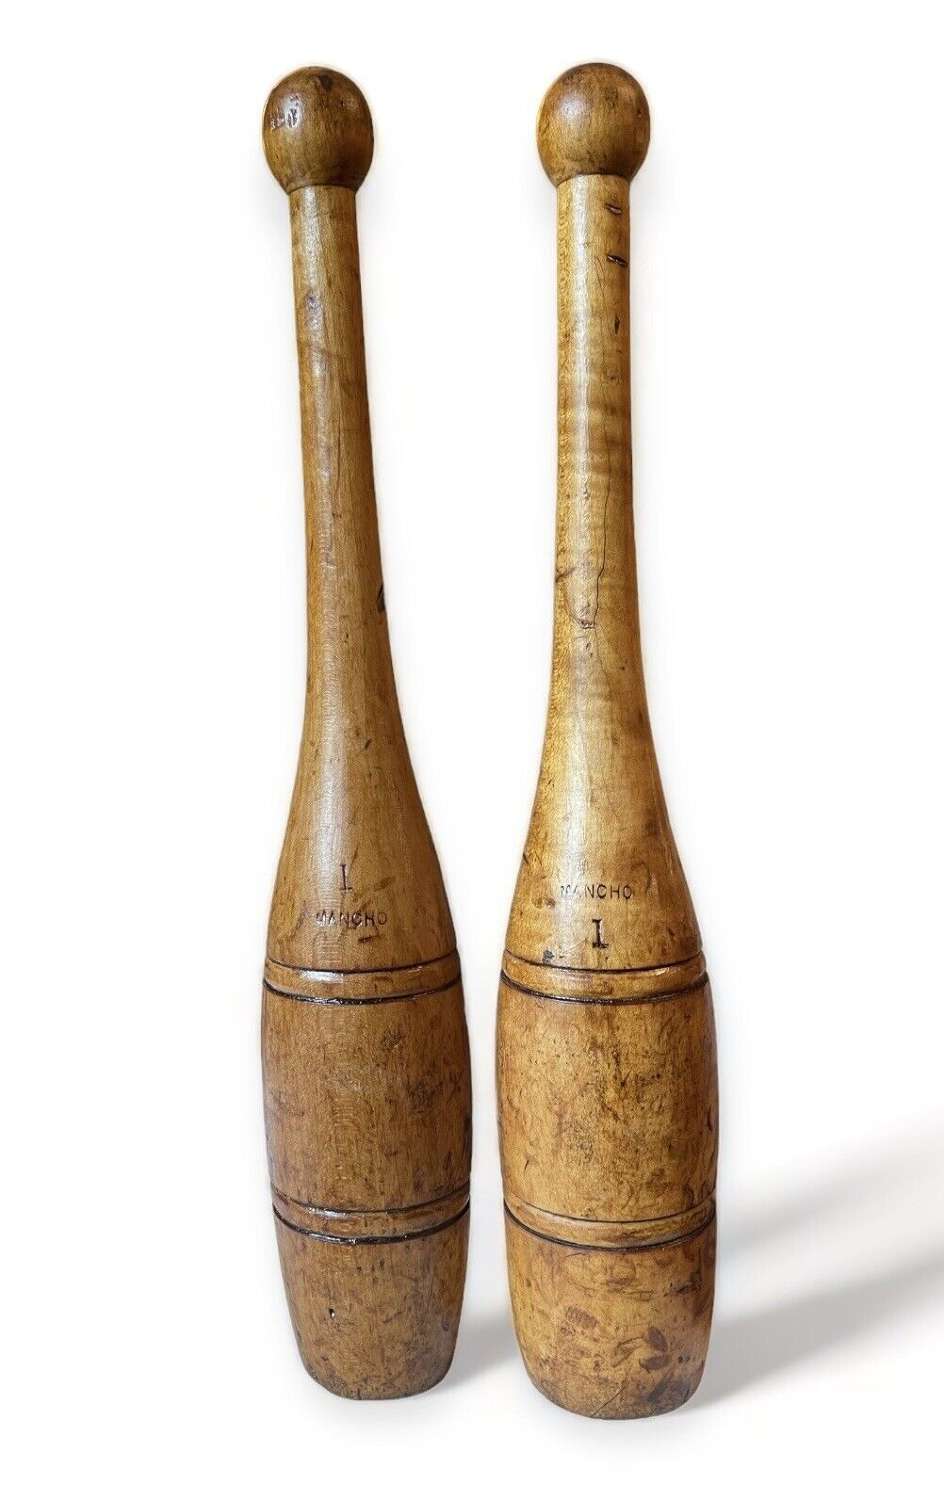 A fabulous pair of antique wooden exercise / juggling clubs.